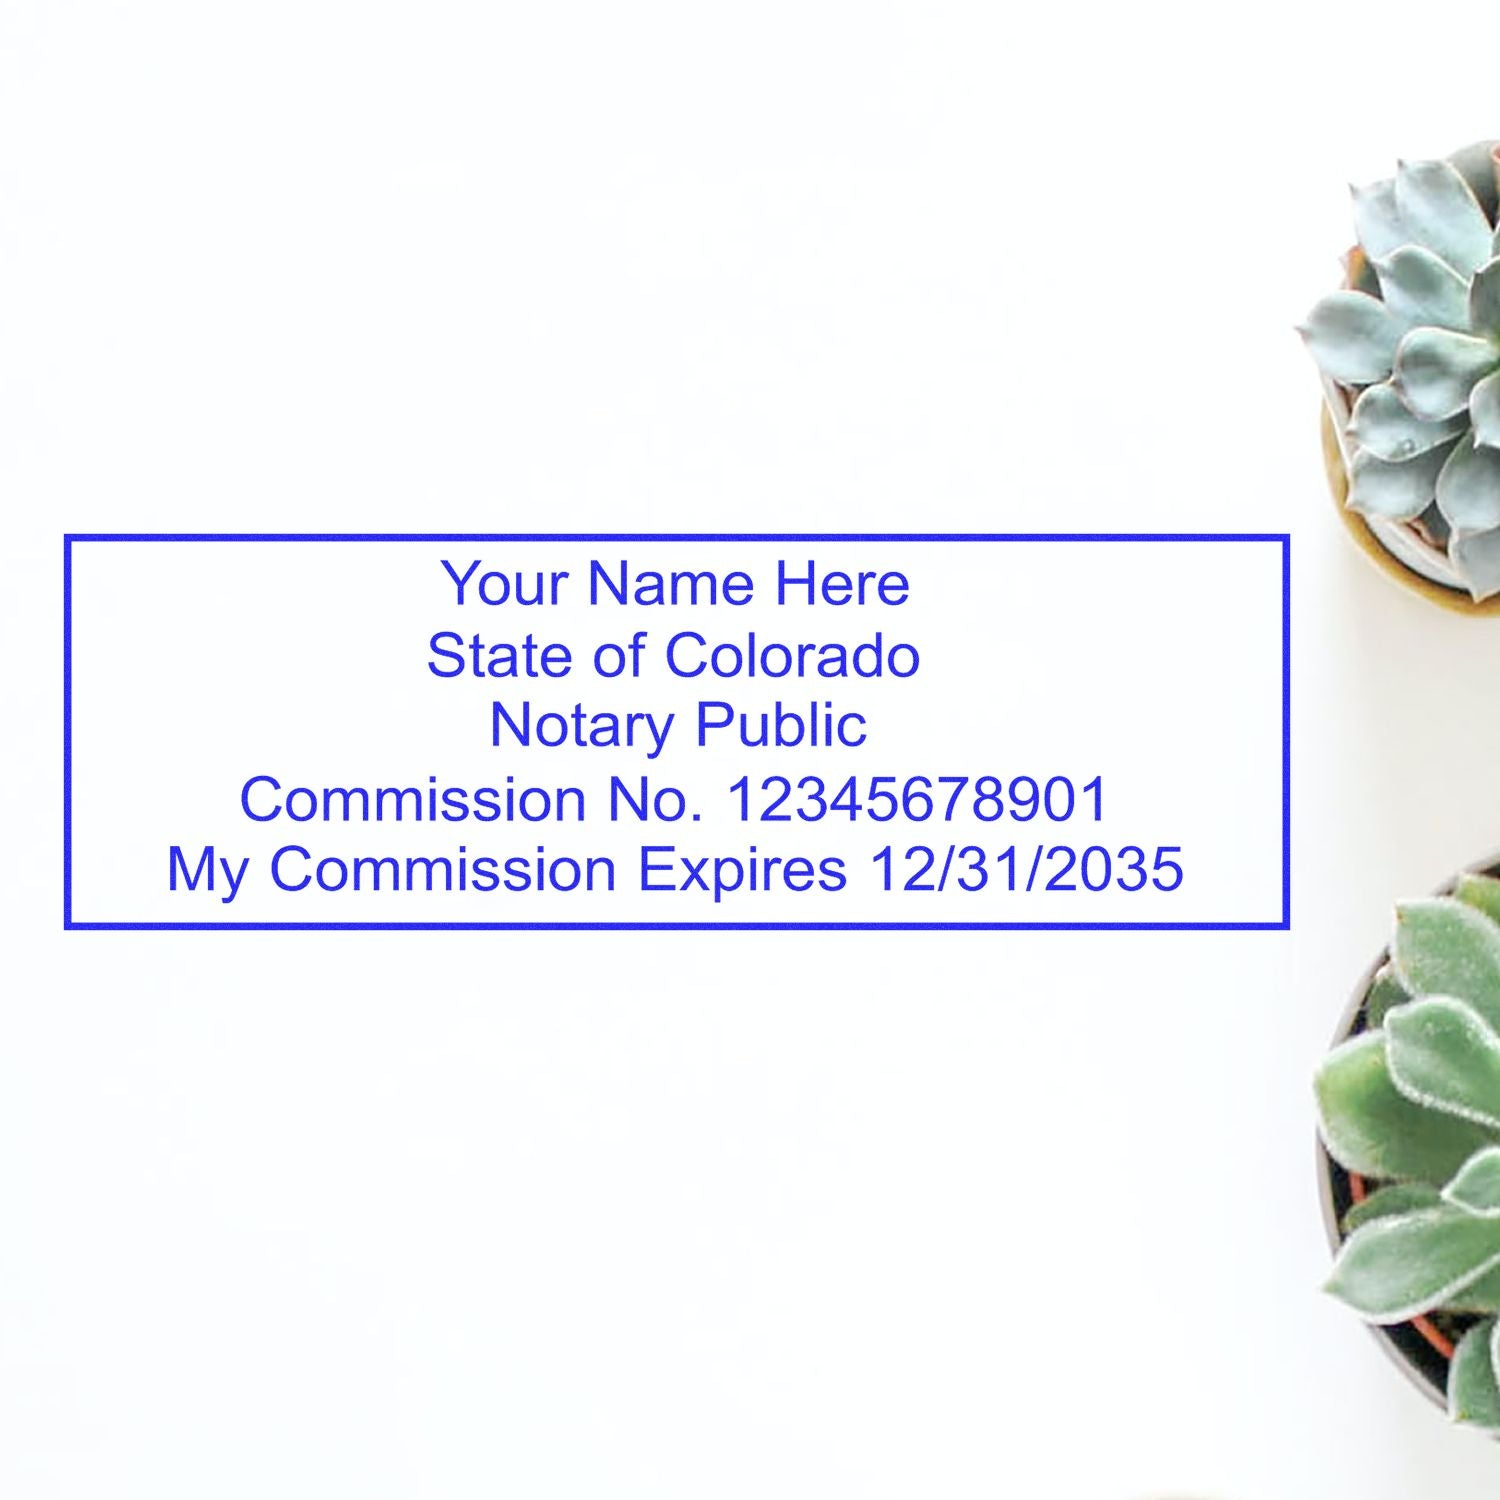 Colorado Notary Supplies: Enhancing Efficiency in your Notary Public Role Feature Image